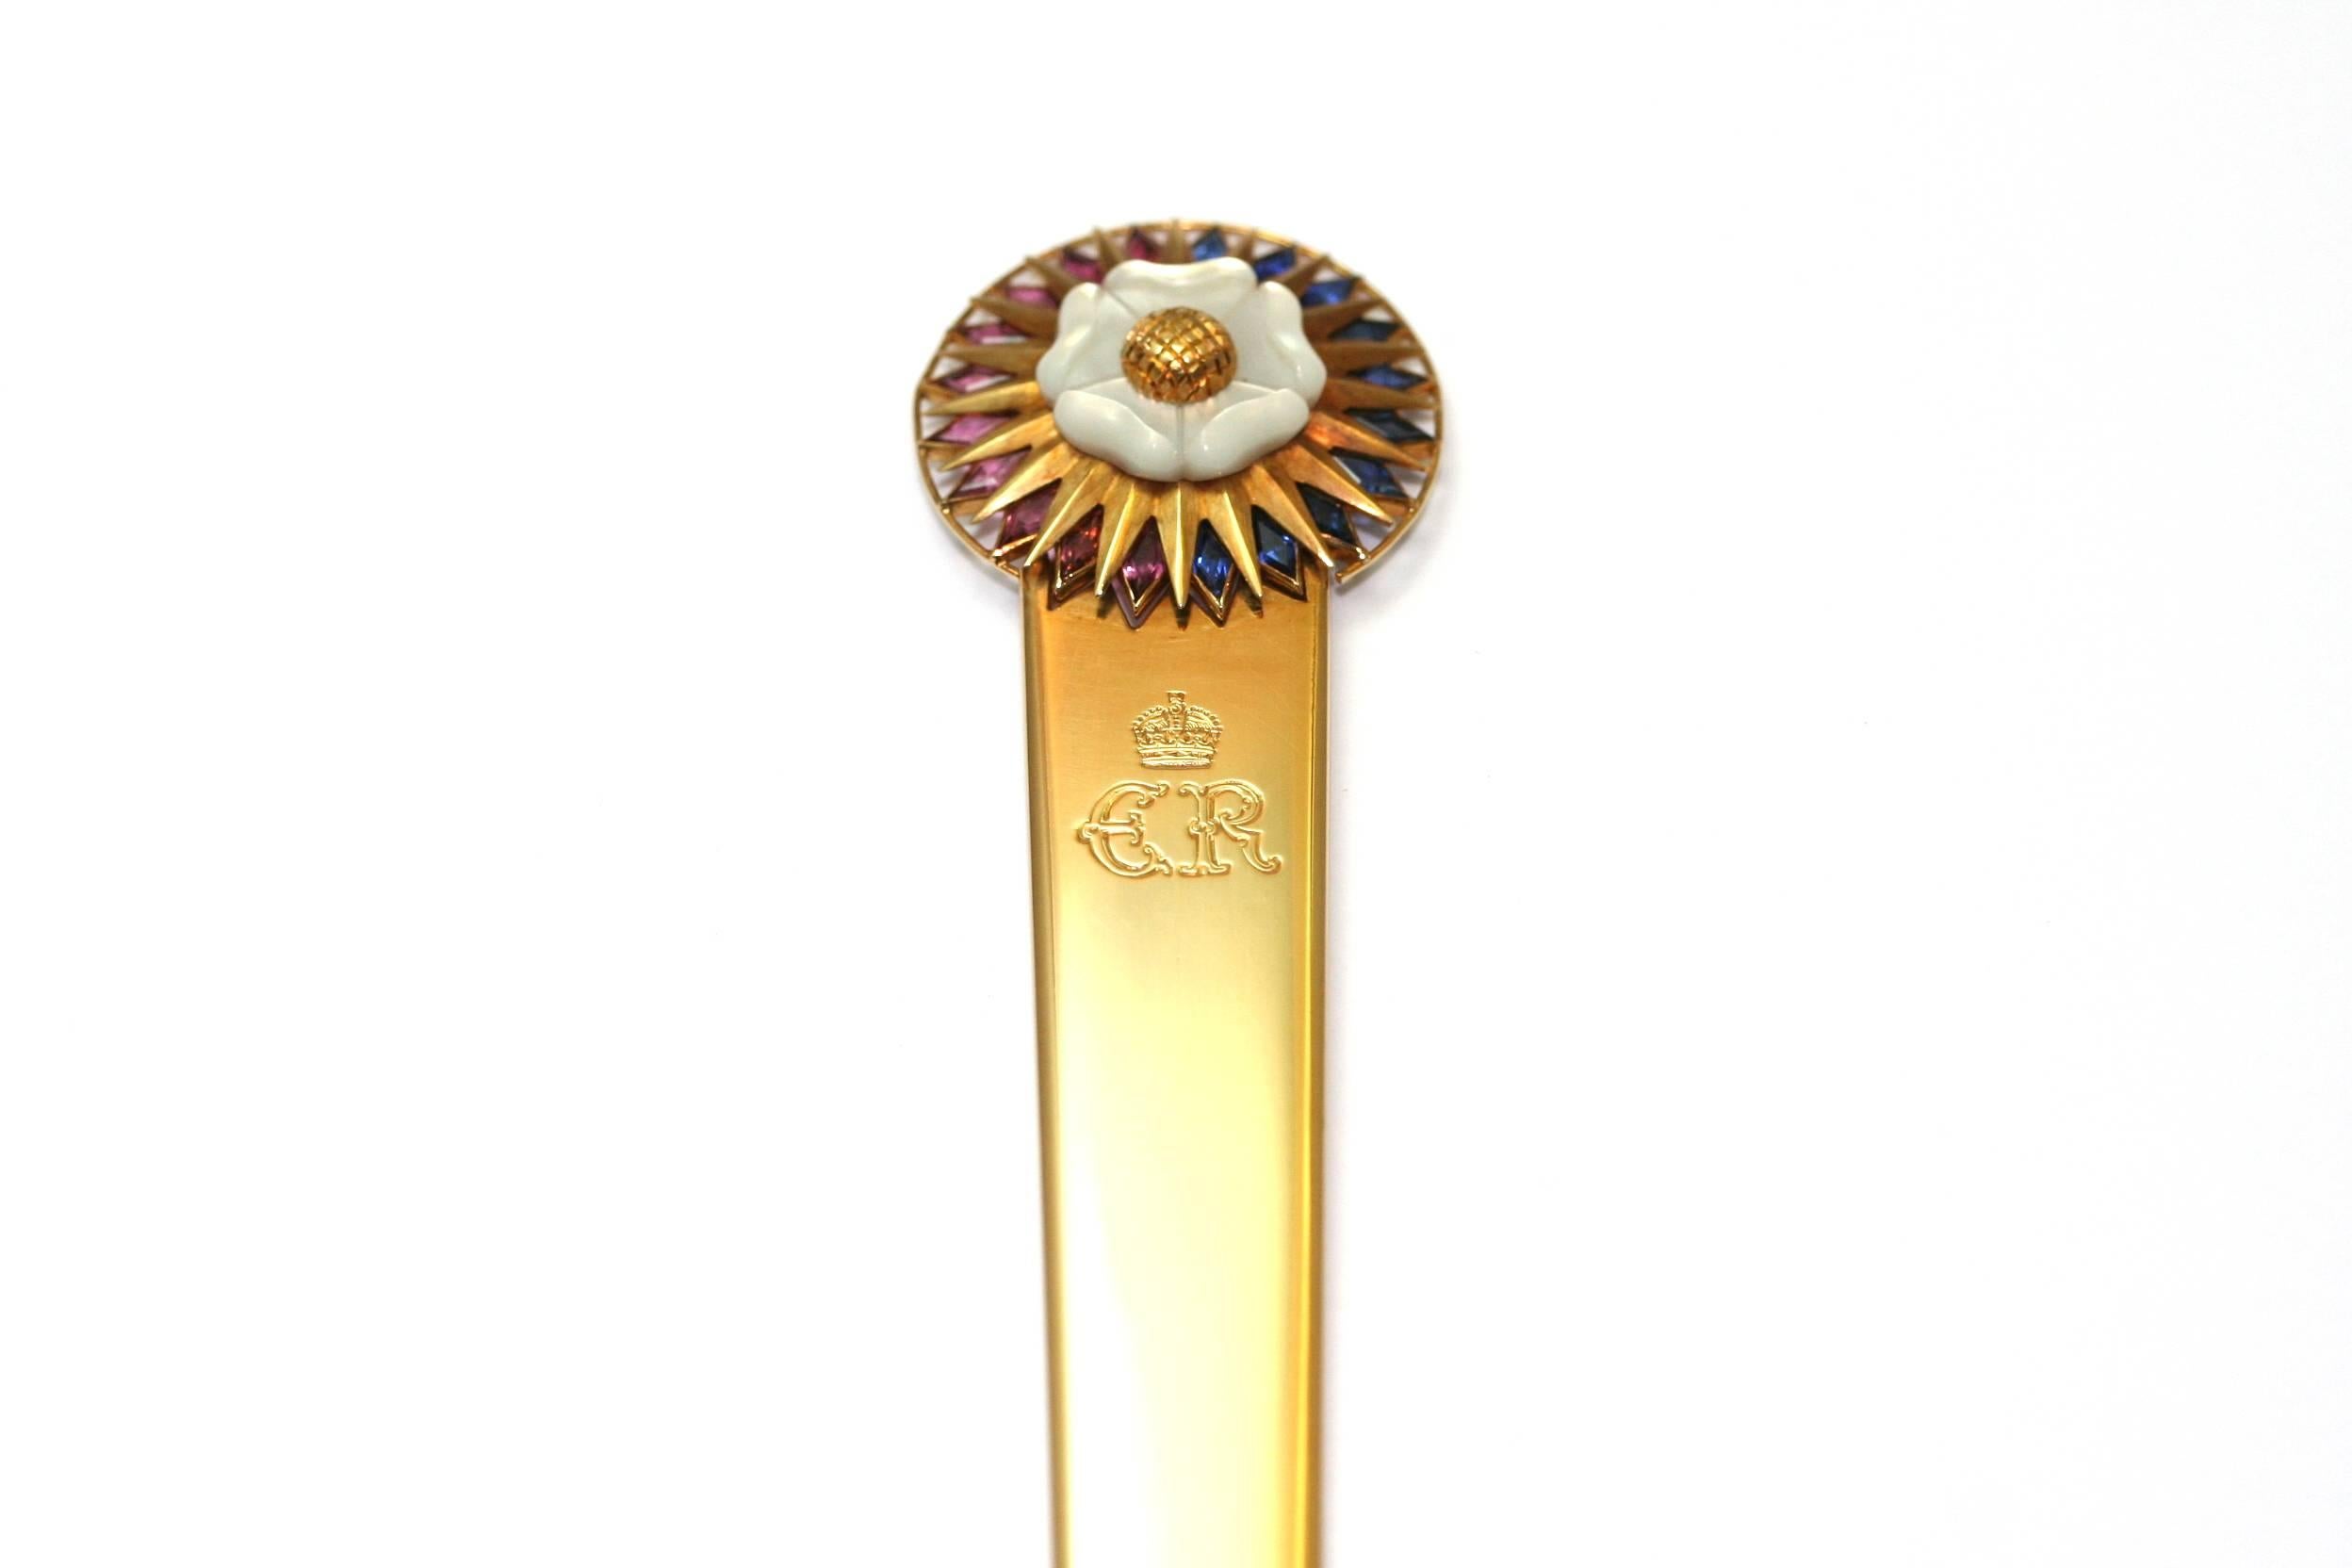 CARTIER LONDON,  Letter Opener King Edward VIII in yellow gold, engraved ER, on the top a stylized flower on mother of pearl, blue and pink sapphires. Signed.
comes with Cartier original box.

All the History surrounding this letter opener makes